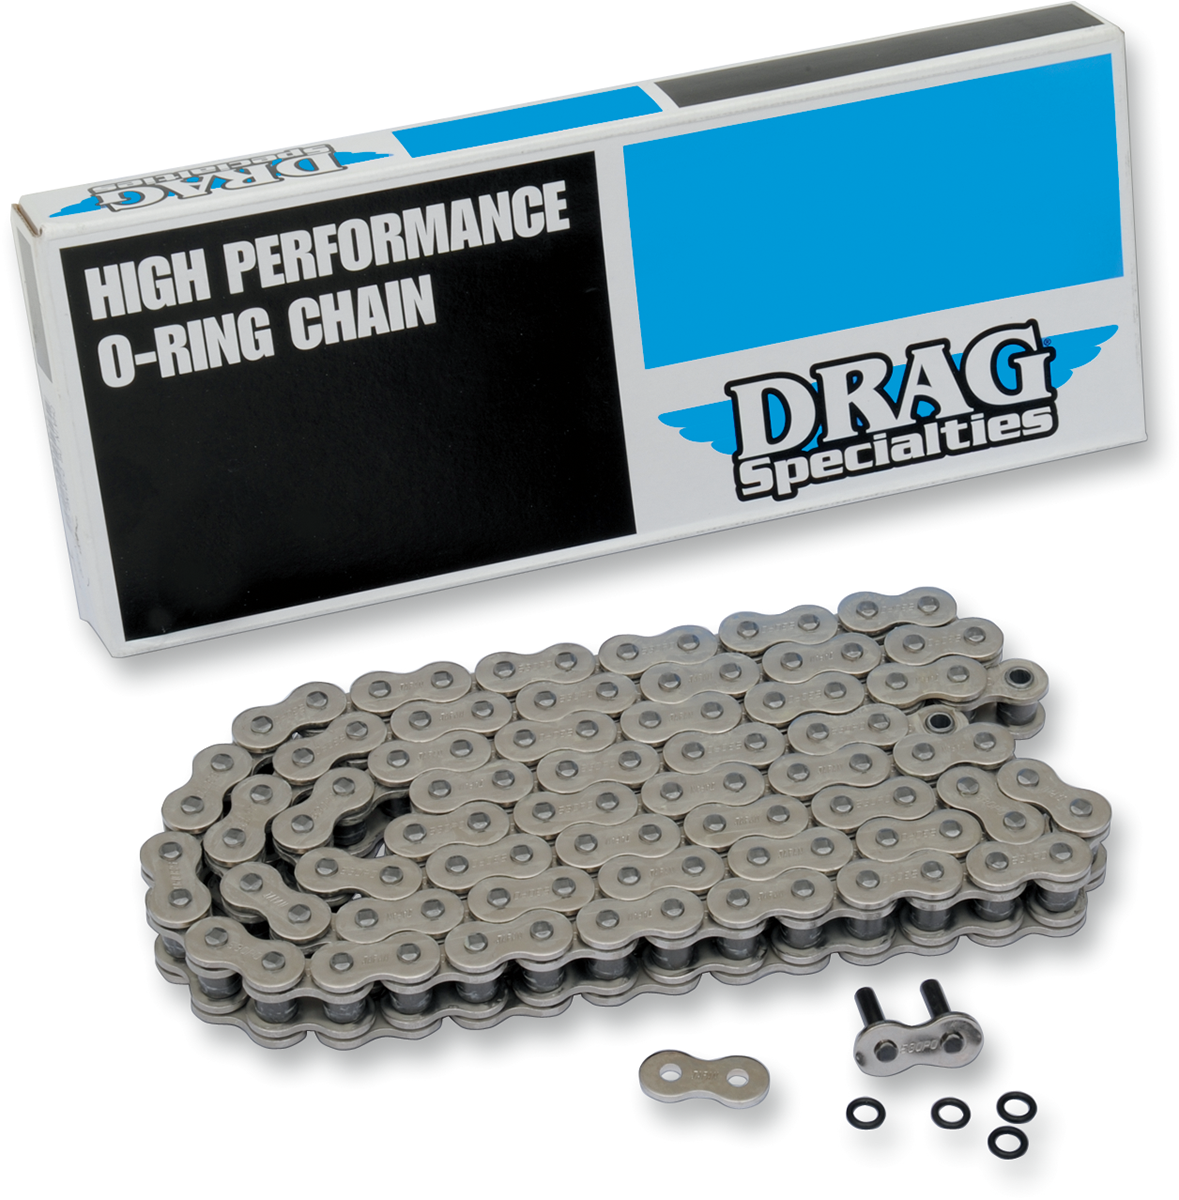 Drag Specialties 530 O-Ring 120 Link Drive Chain fits for 1936-90 Harley Touring